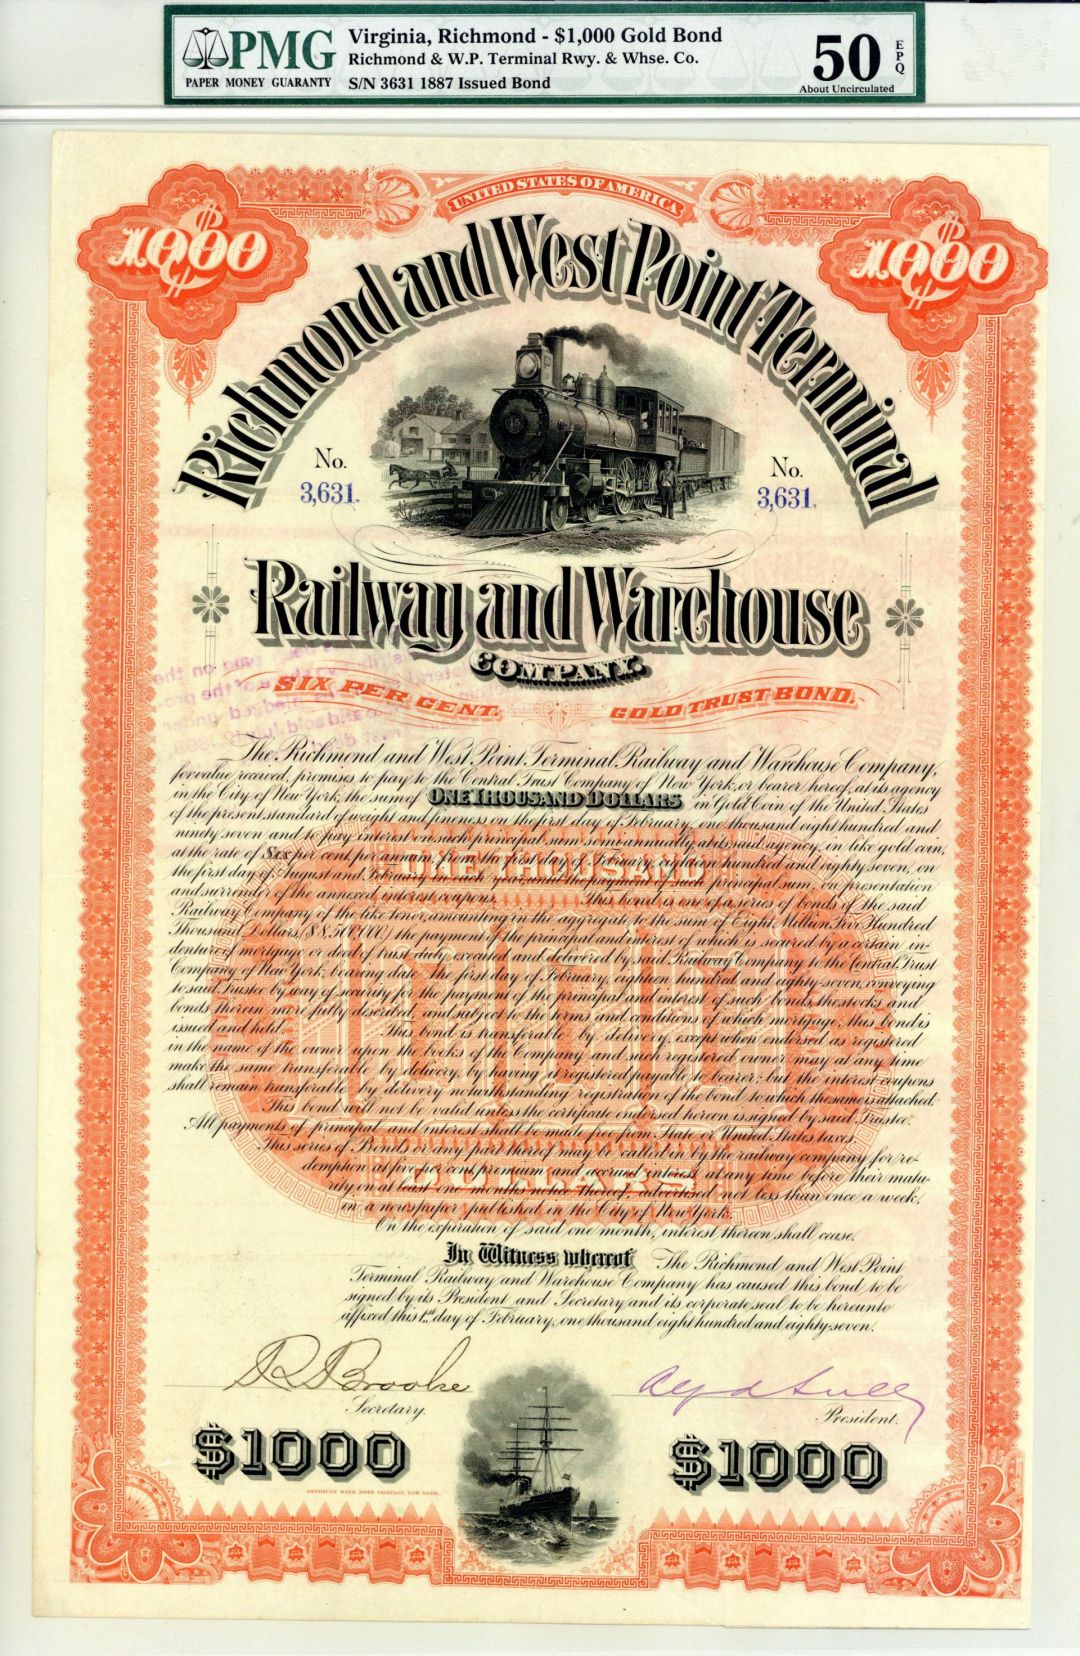 Richmond and West Point Terminal Railway and Warehouse Co. - $1,000 Bond